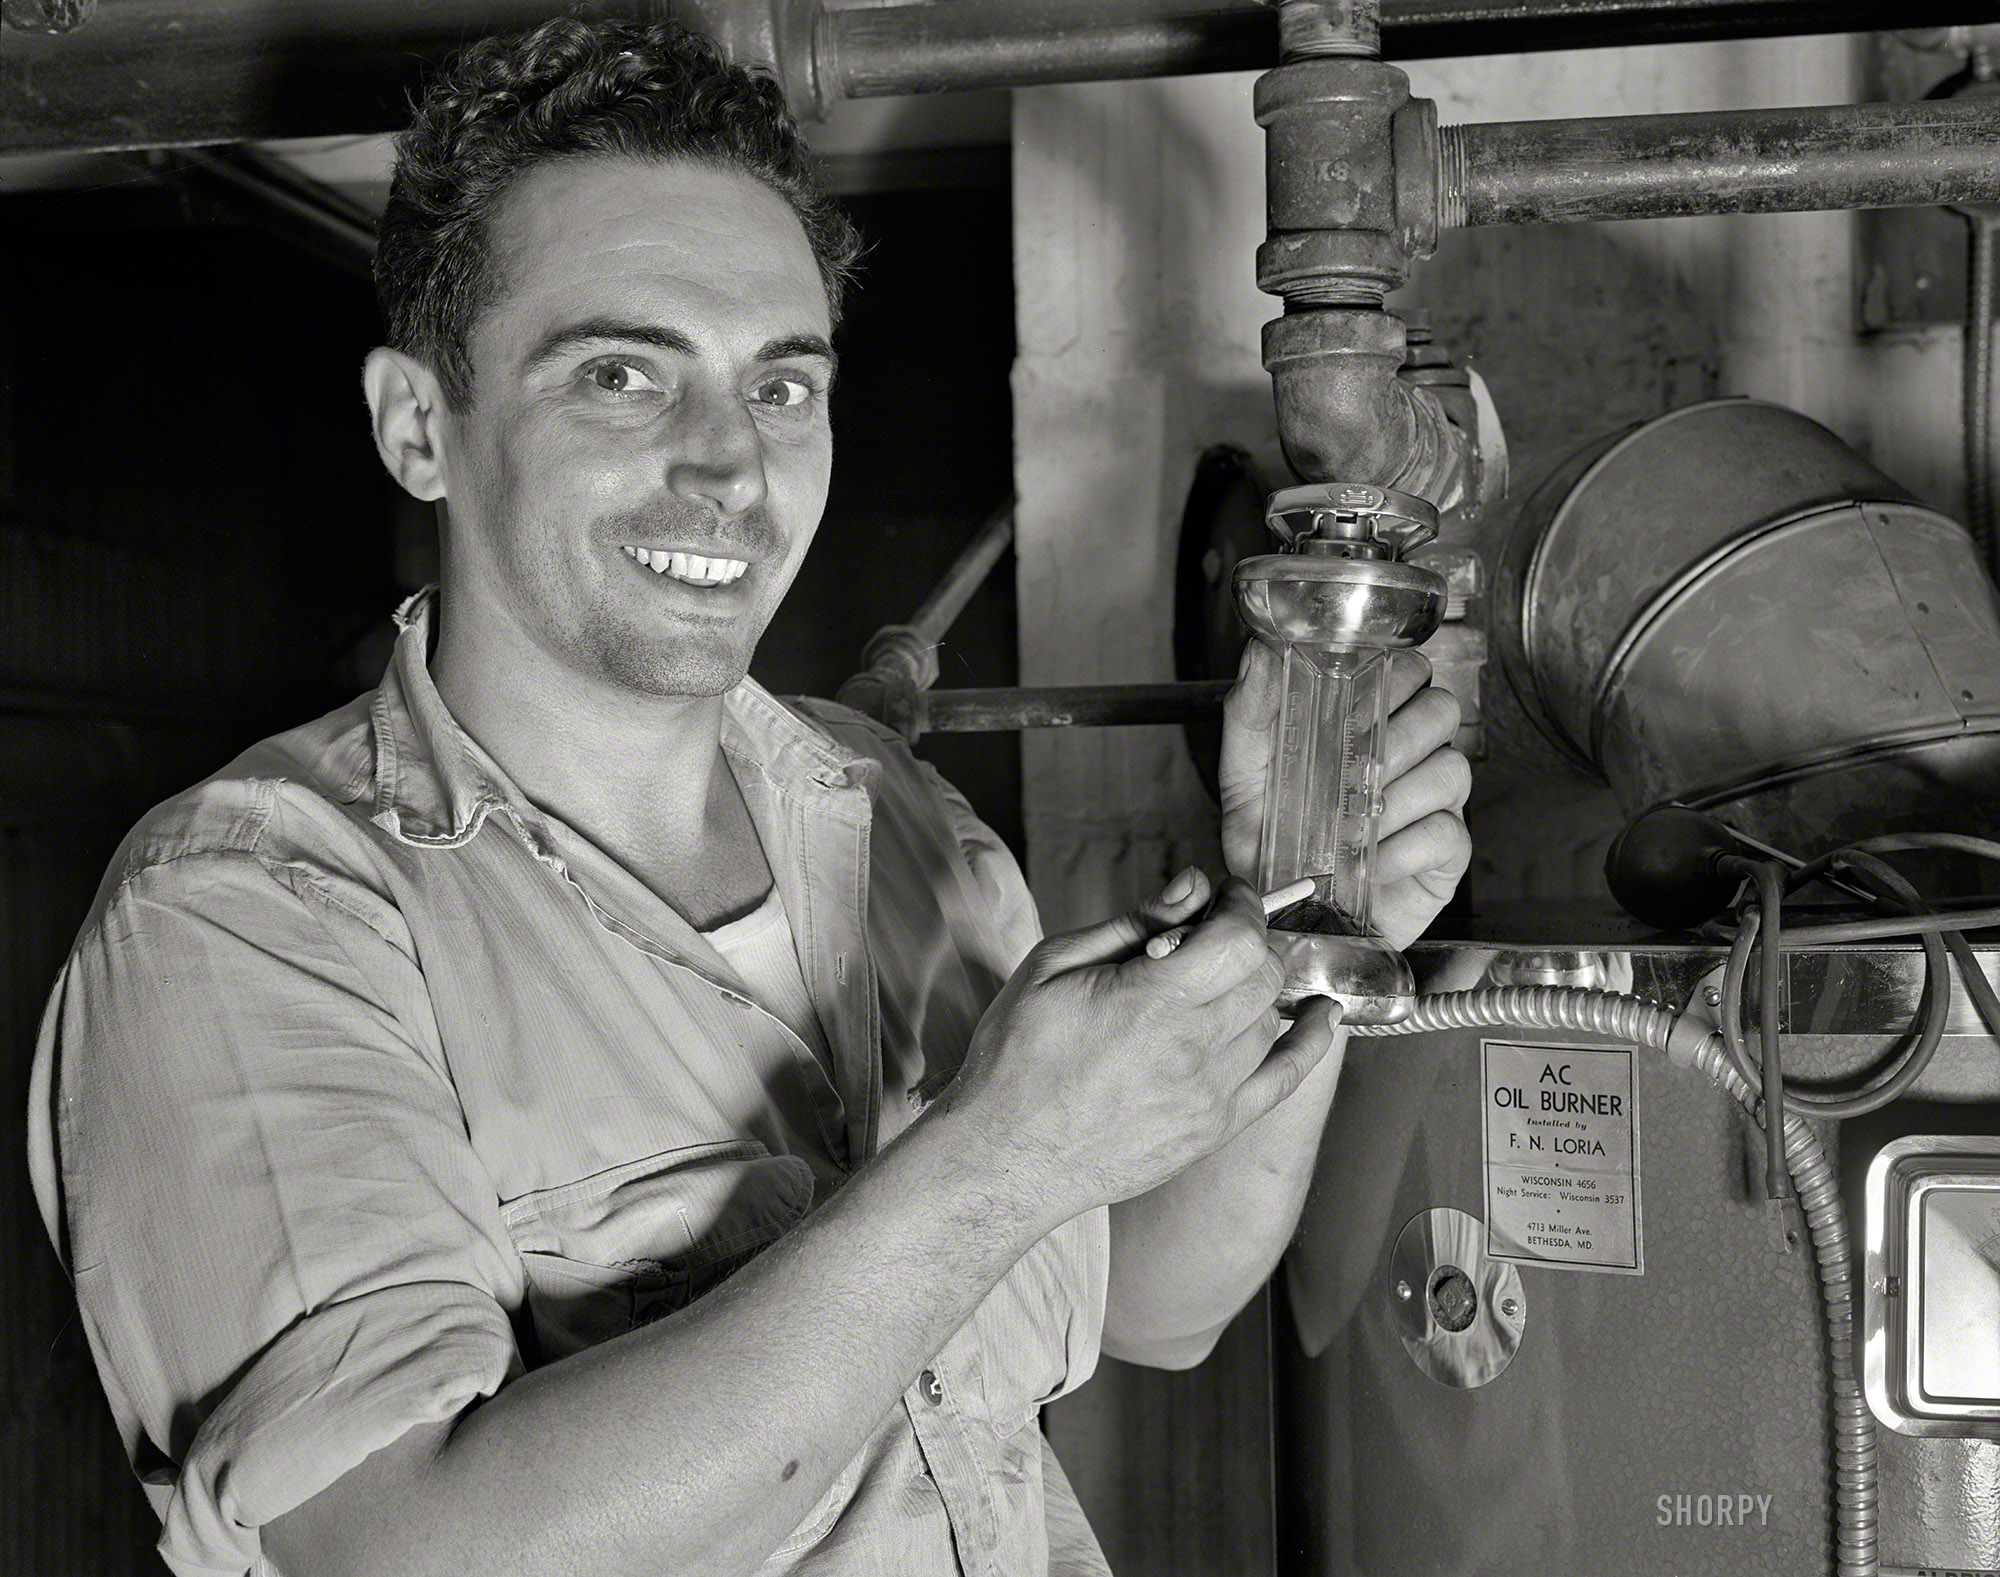 Circa 1942, in the vicinity of Washington, D.C.: "Conservation of fuel oil." When the tradesman takes that pencil from behind his ear and uses it as a pointer, you know he's telling you something important. No photographer credit but we will guess Ann Rosener for the Office of War Information. View full size.